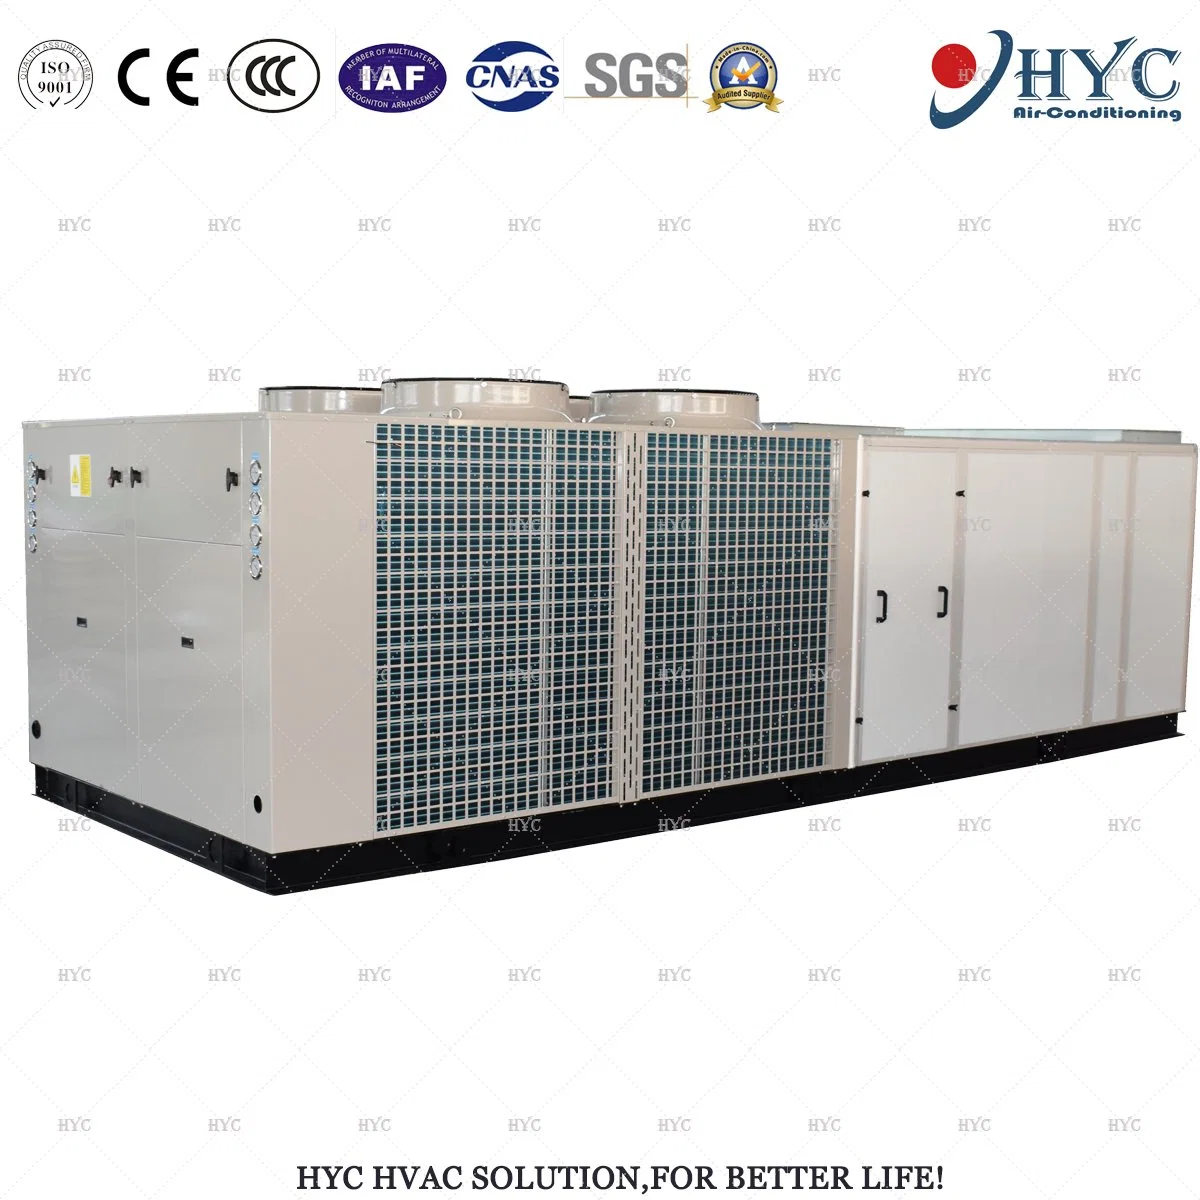 Ce T1 Condition Air Cooled Rooftop Package Unit